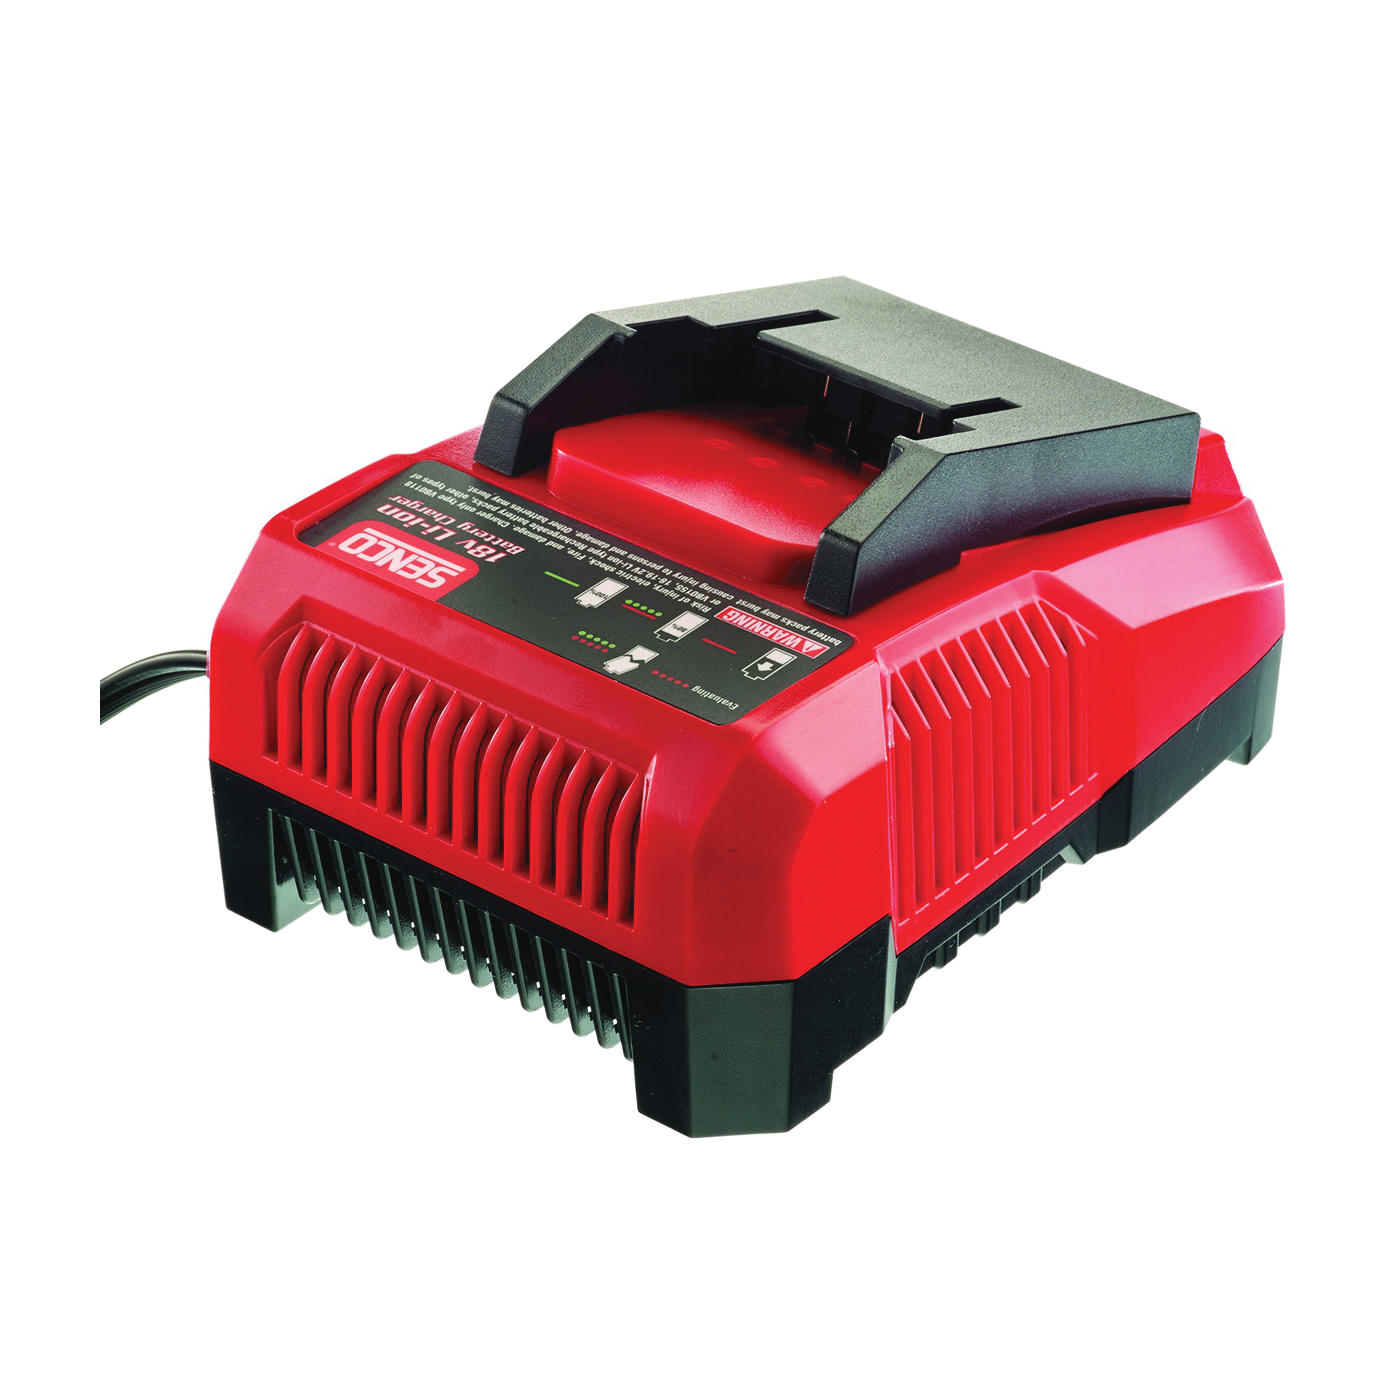 VB0156 Battery Charger, 18 V Output, 1.5 Ah, 15 to 20 min Charge, Battery Included: Yes